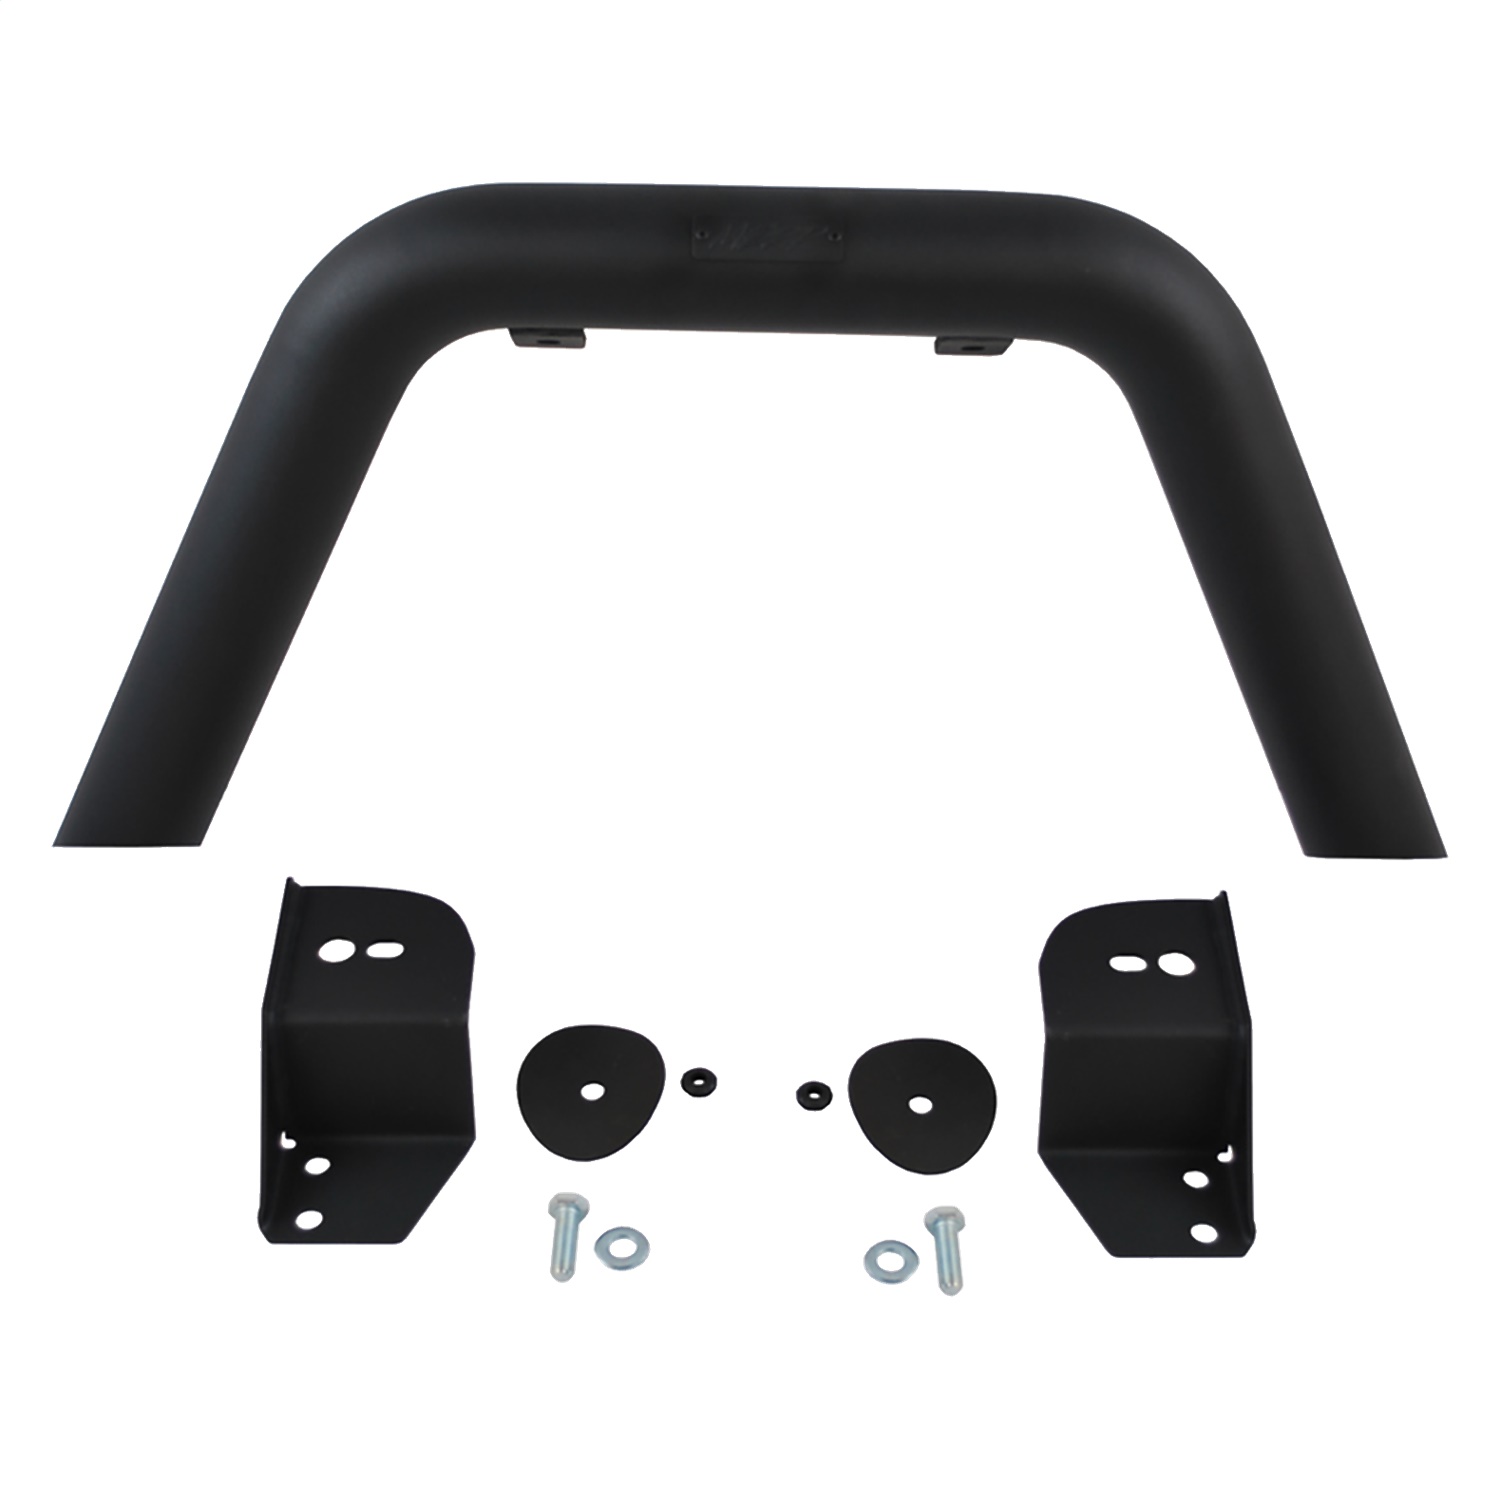 MBRP Exhaust MBRP Exhaust 131086 Light Bar/Grill Guard System Fits 97-06 Wrangler (TJ)